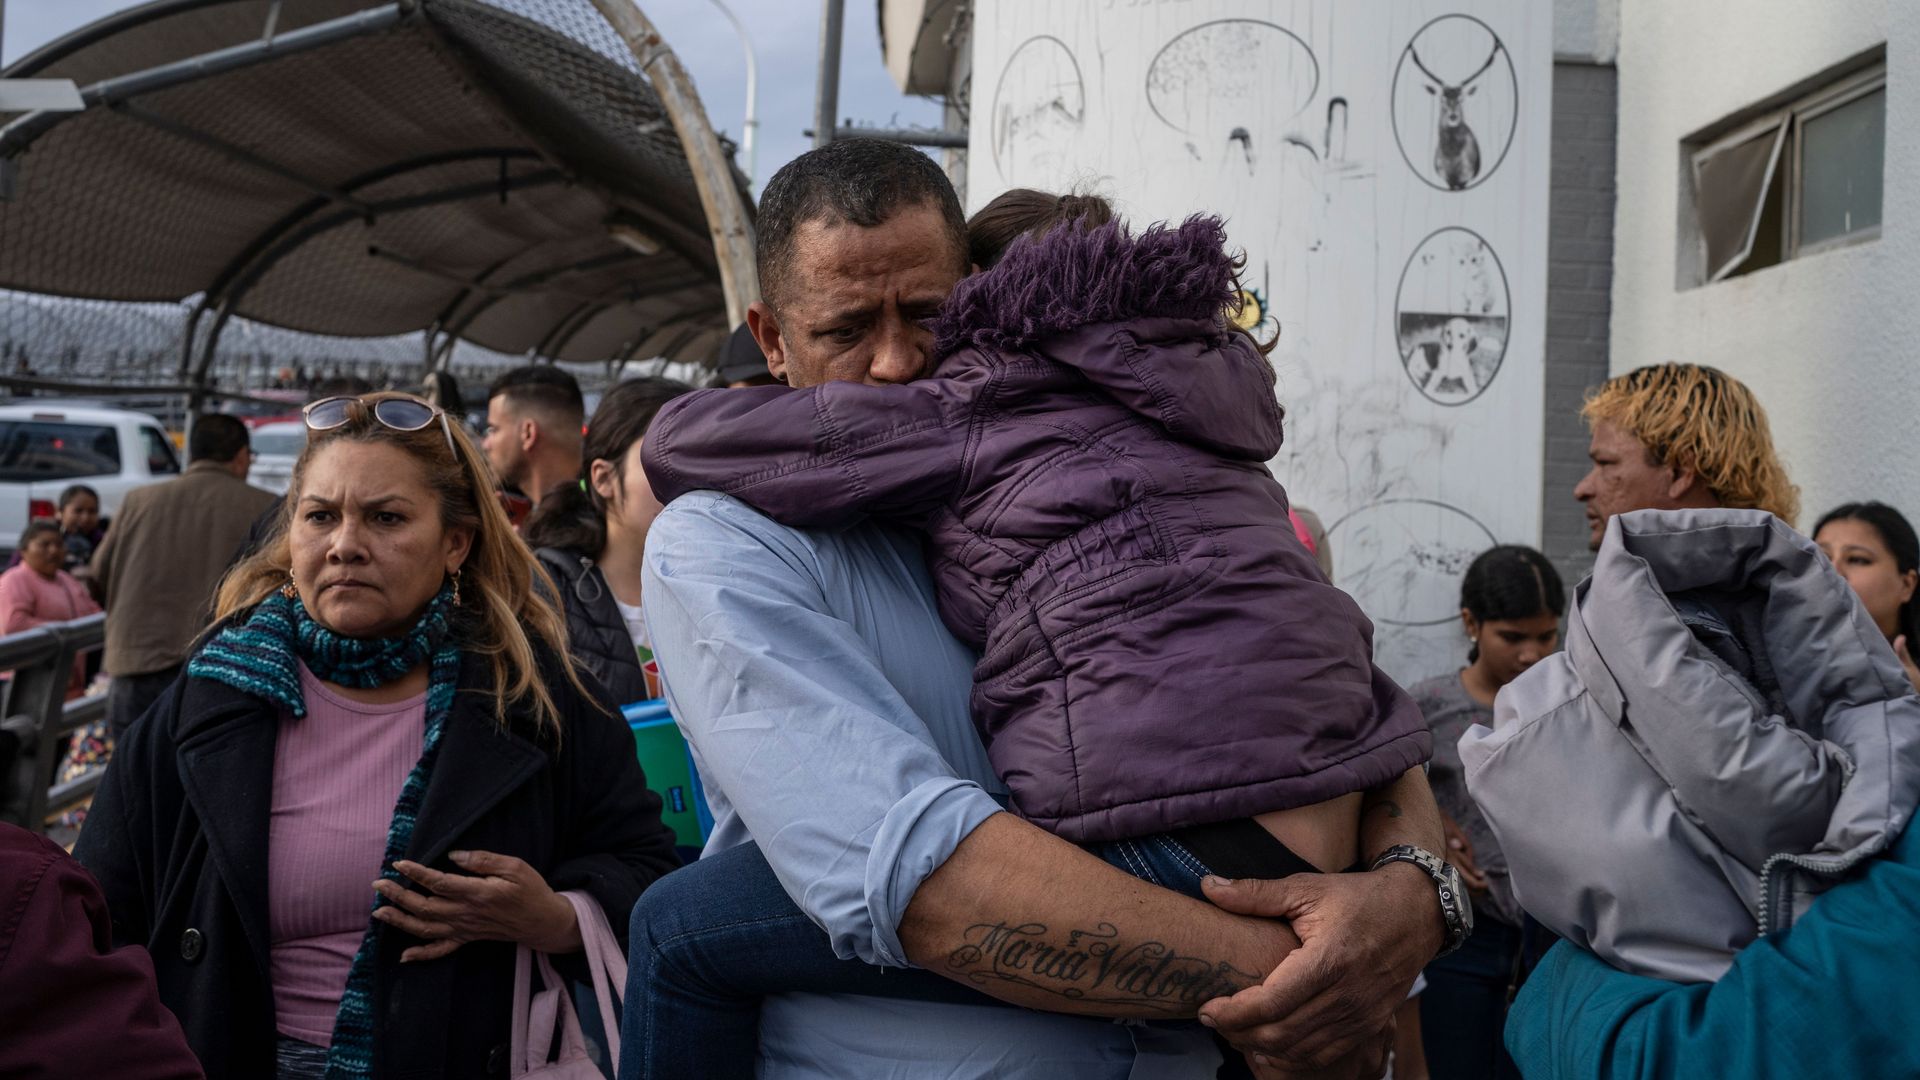  A man from Venezuela seeking asylum in the United States holds his daughter on February 28, 2020, in Ciudad Juárez.